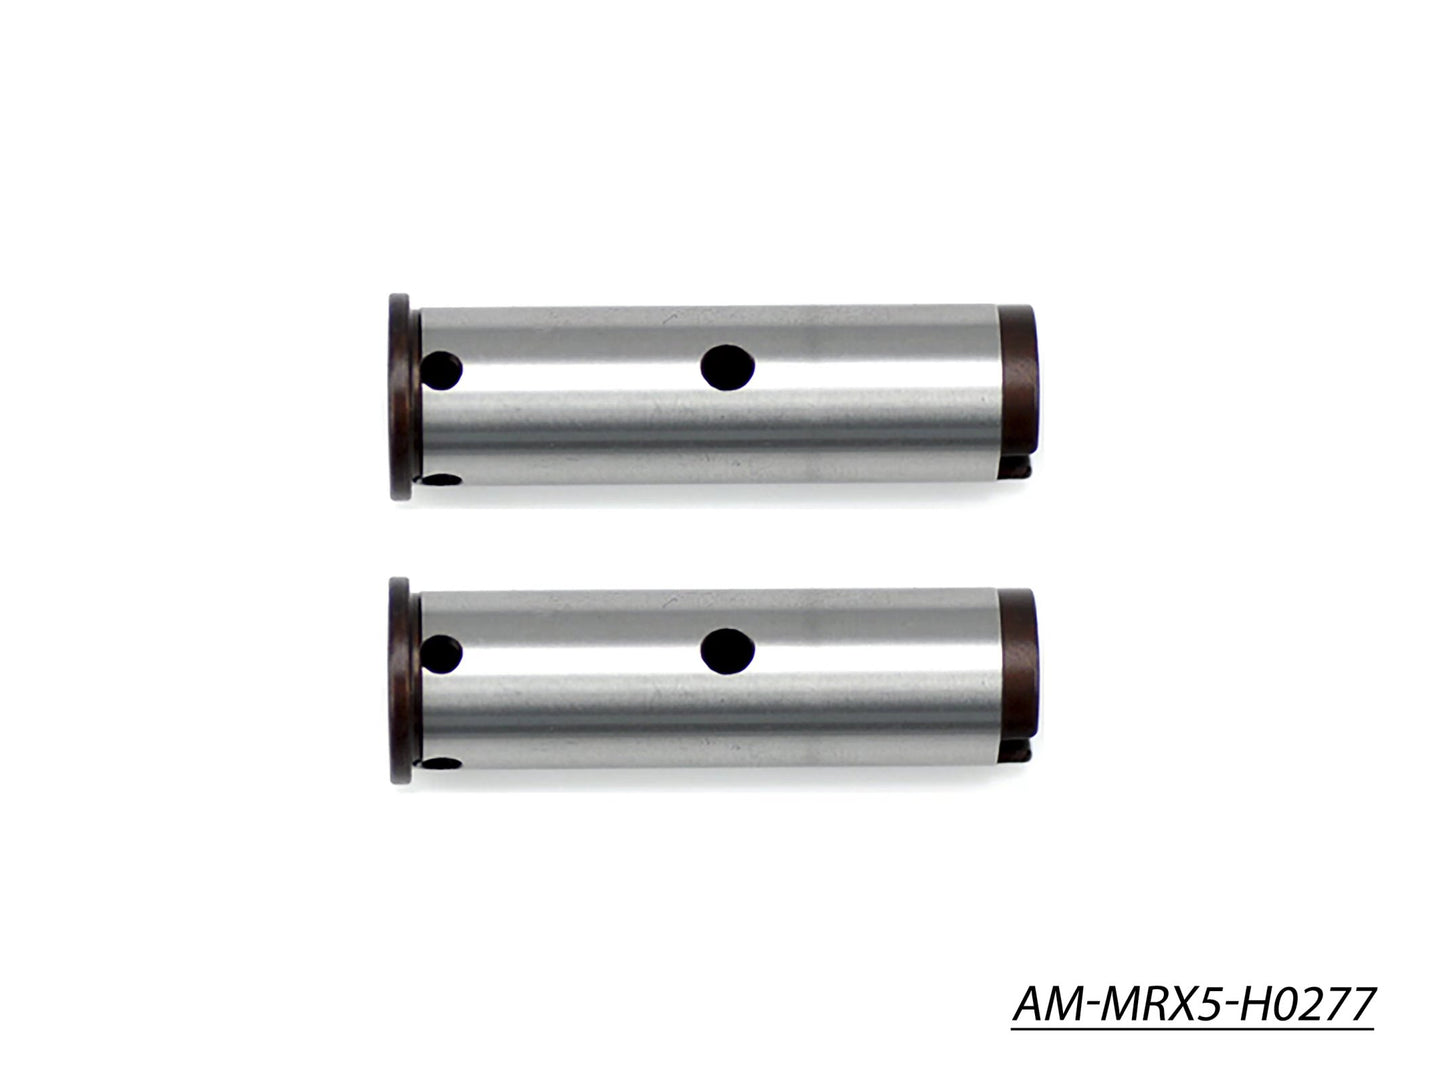 Rear Axle Shaft For Universal (Spring Steel) (2) (AM-MRX5-H0277)